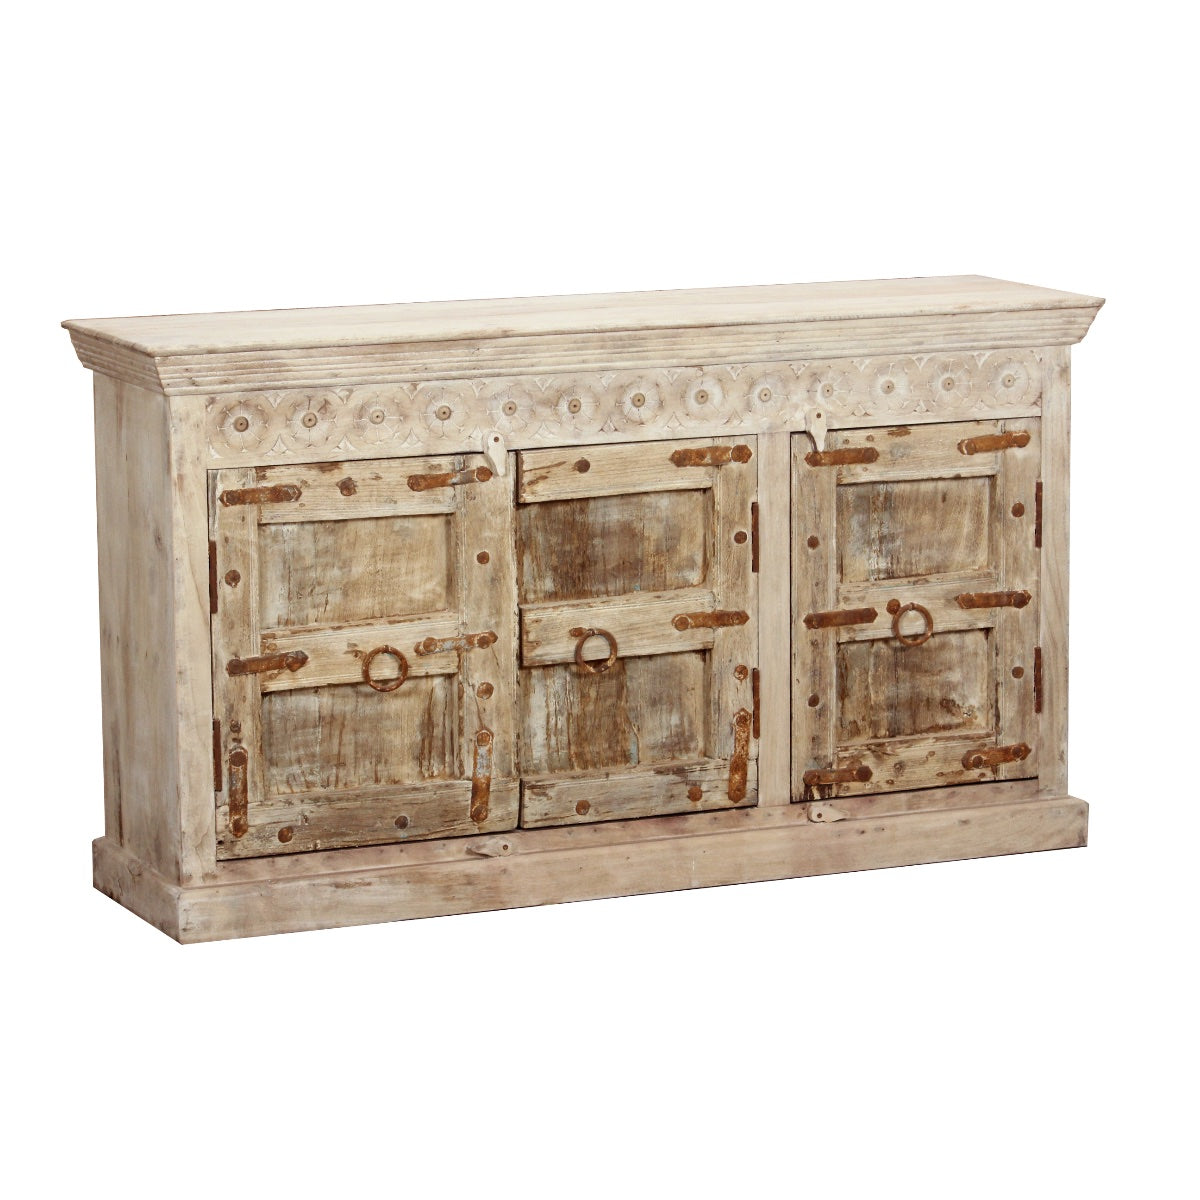 Indian Acid Wash Timber 150x40x80cm Sideboard | Assorted Designs